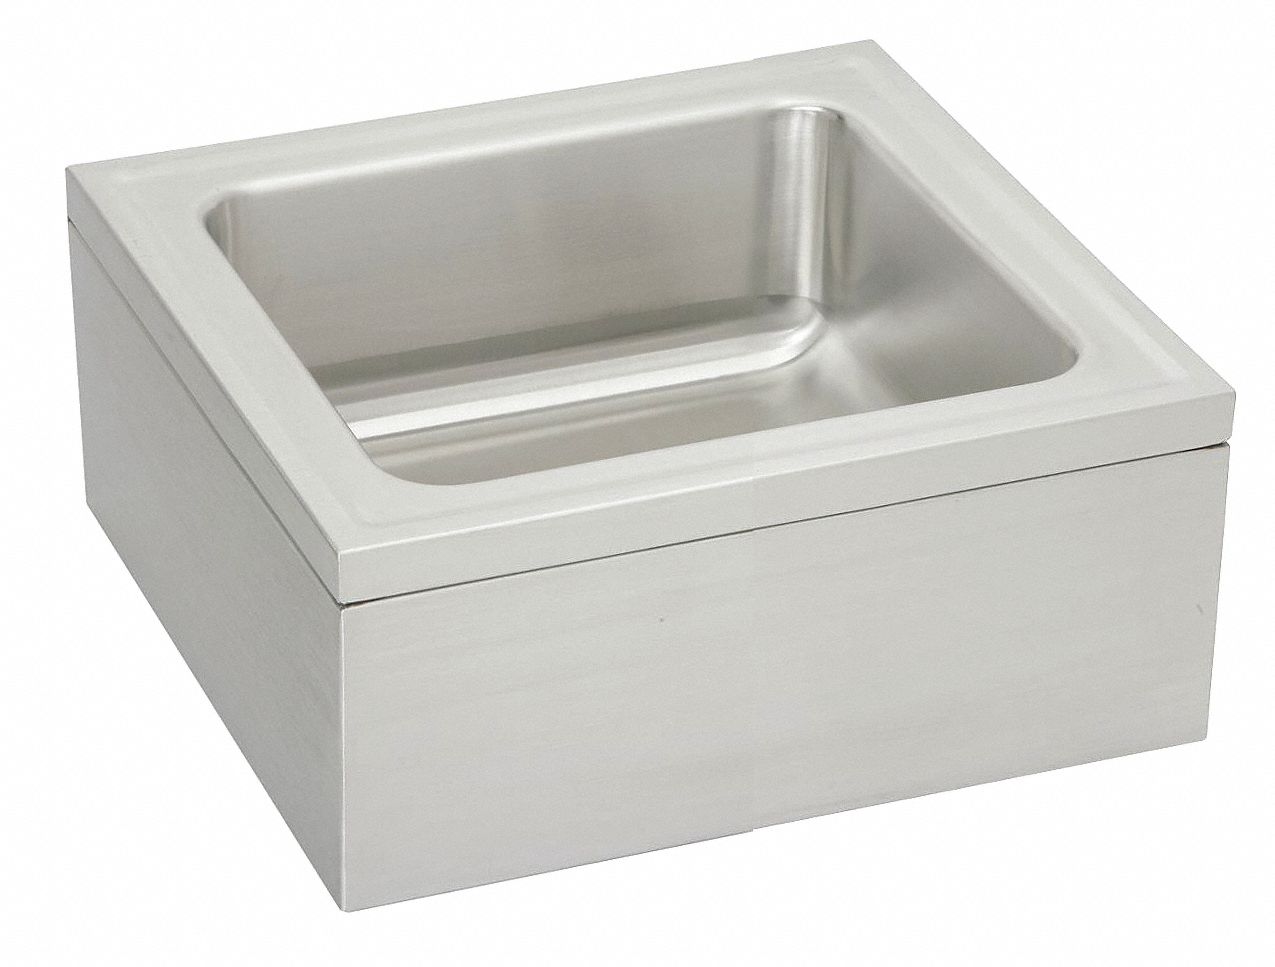 Floor Mount Utility Sink 1 Bowl Stainless Steel 25 L X 23 W X 8 H